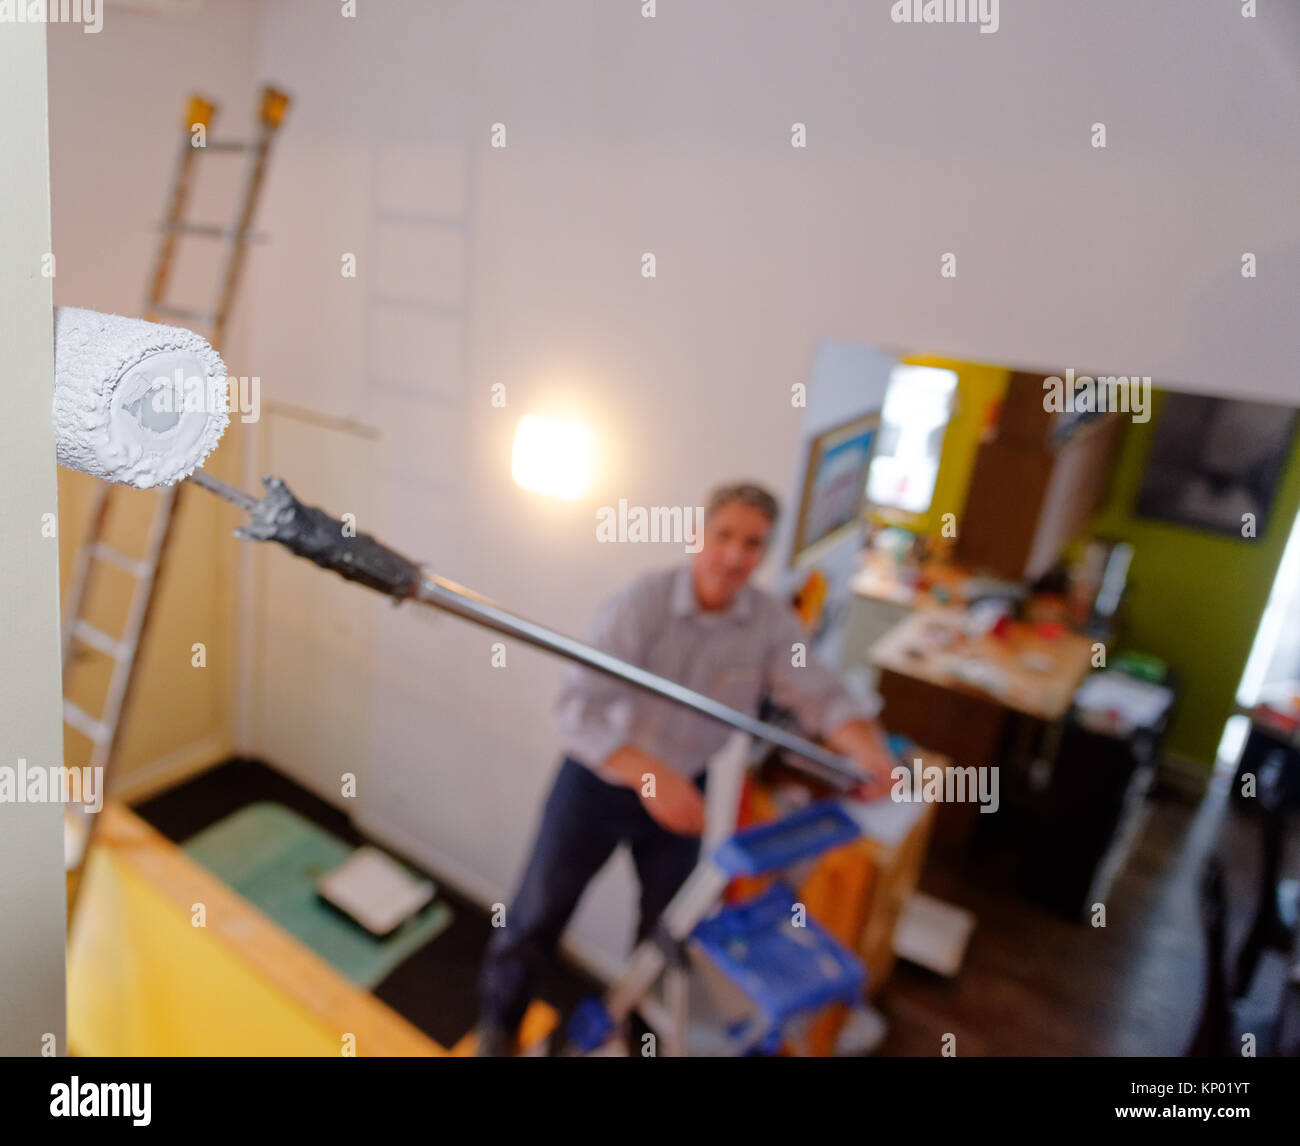 A decorator painting a house interior, difficult access involving scaffolding Stock Photo